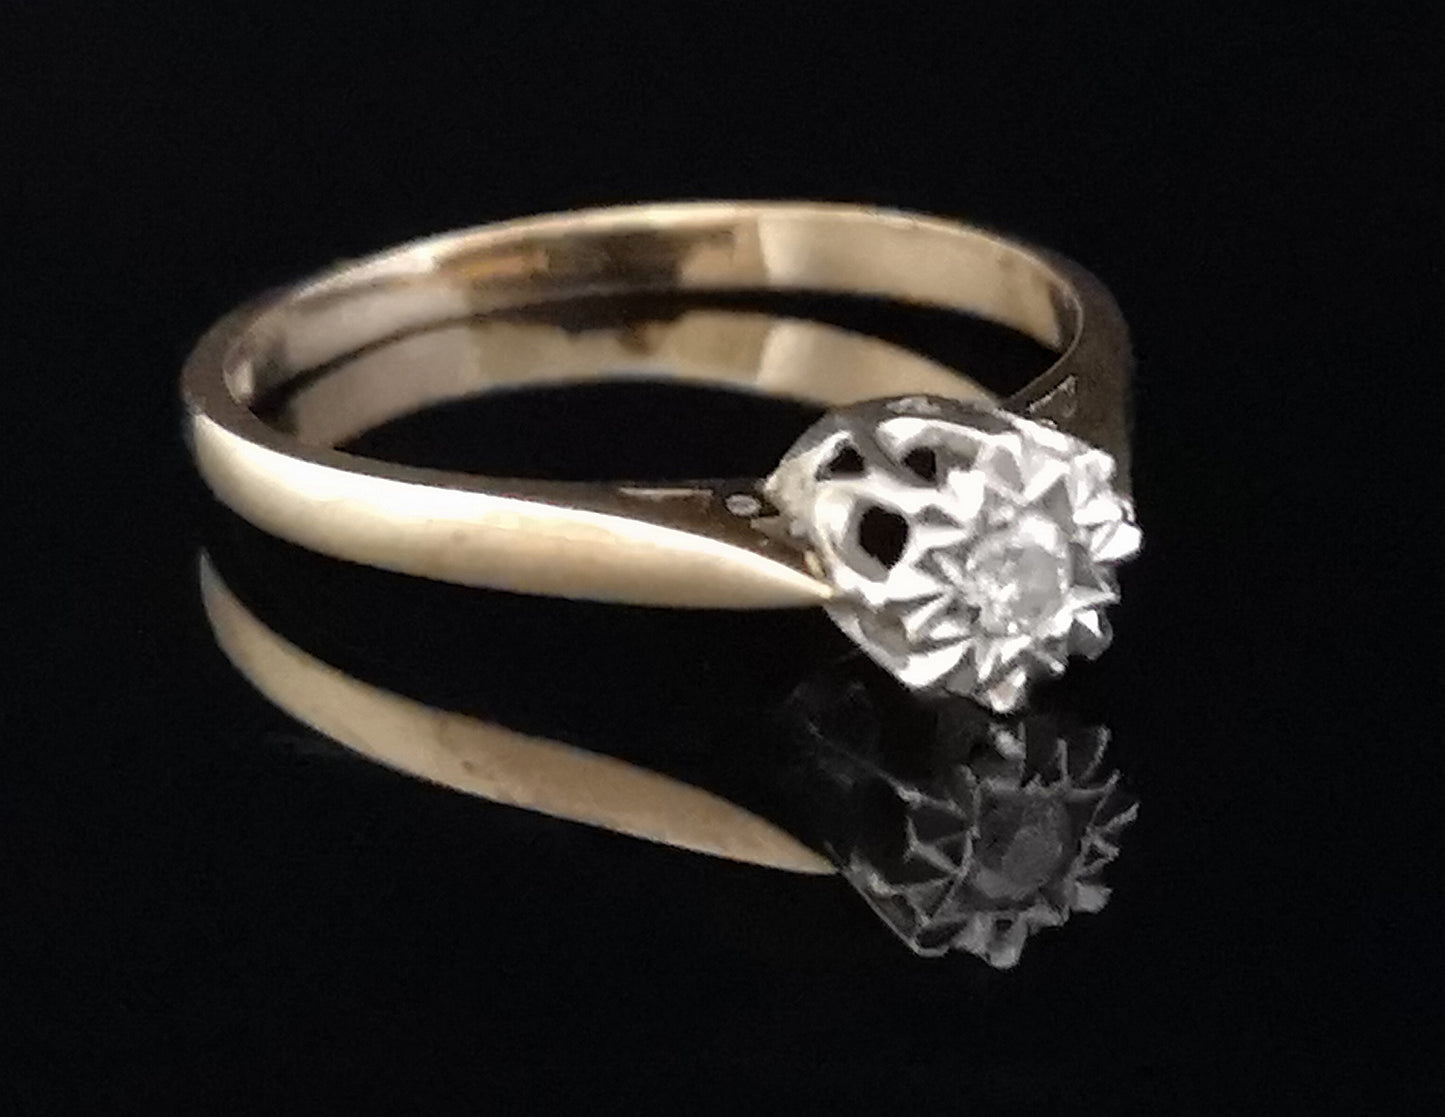 Vintage 9ct gold diamond solitaire ring, engagement